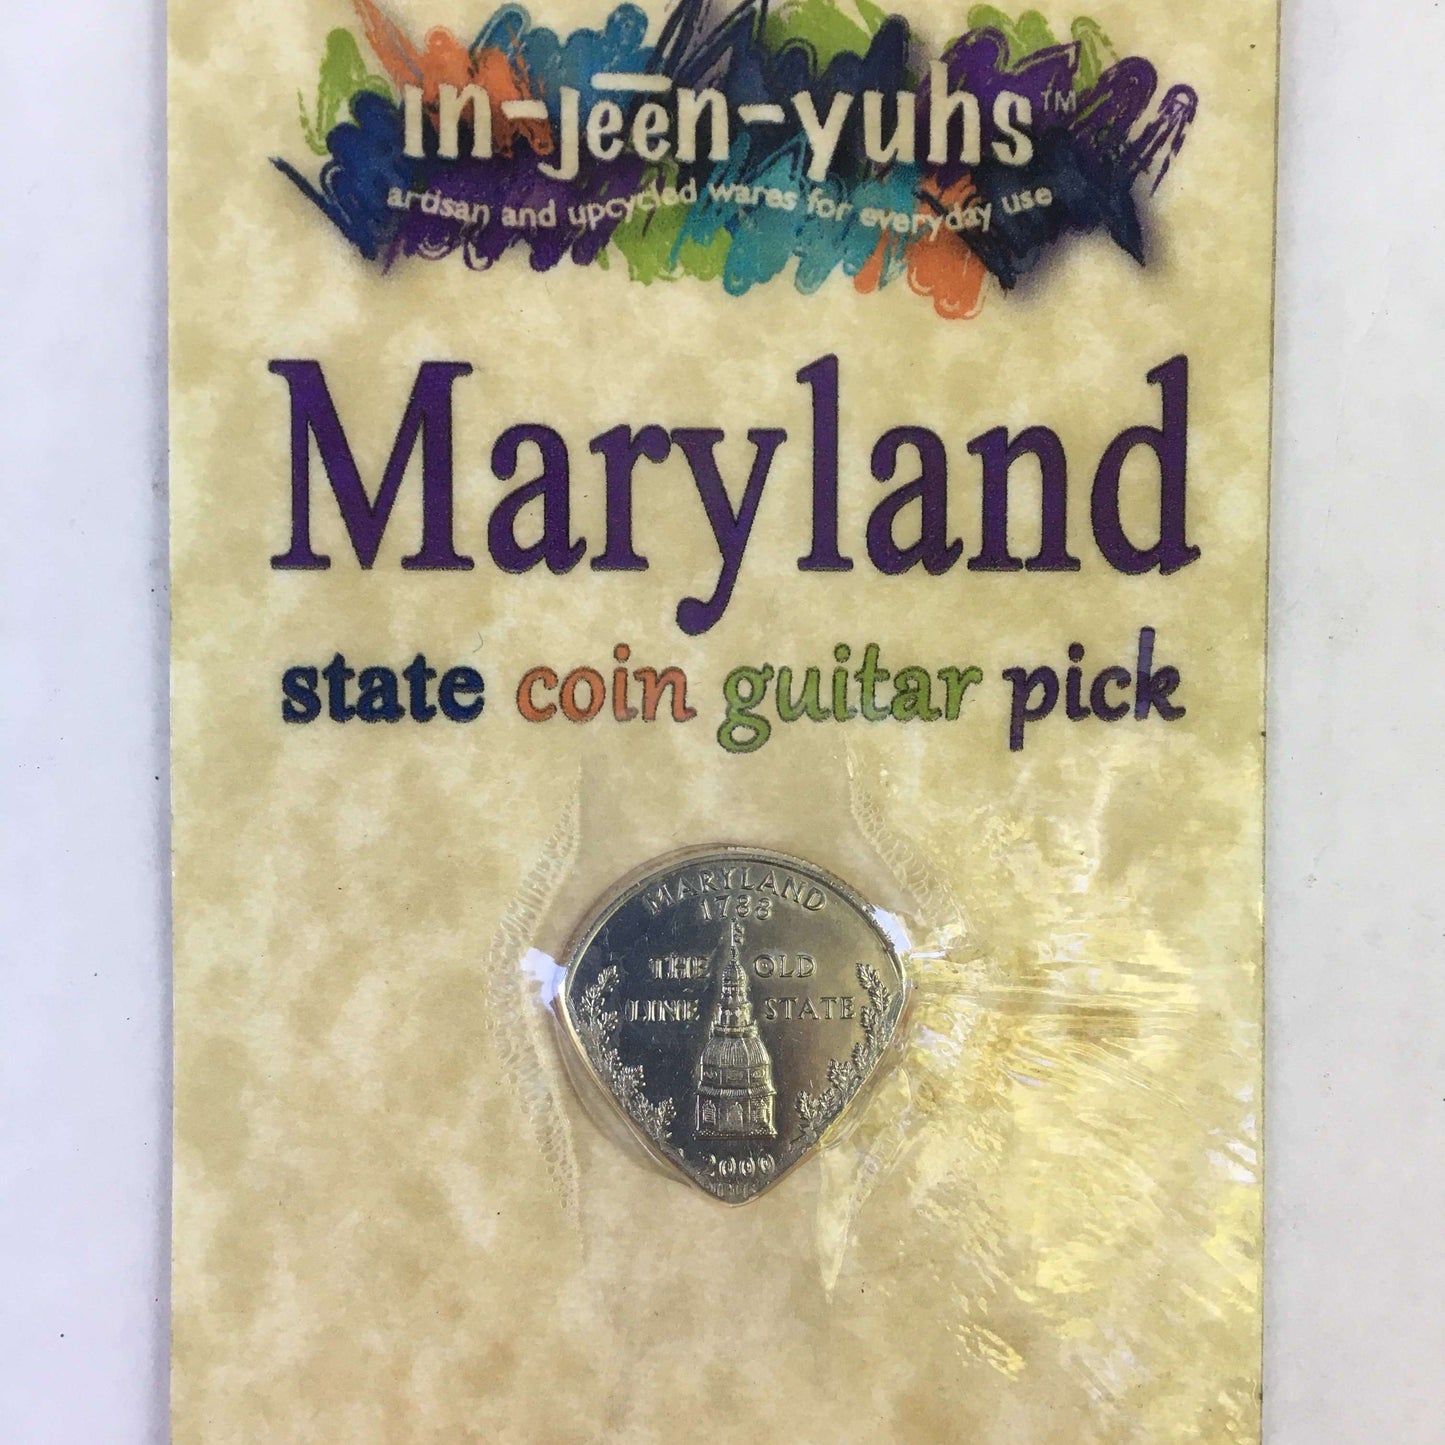 What Was Your First Coin Book?